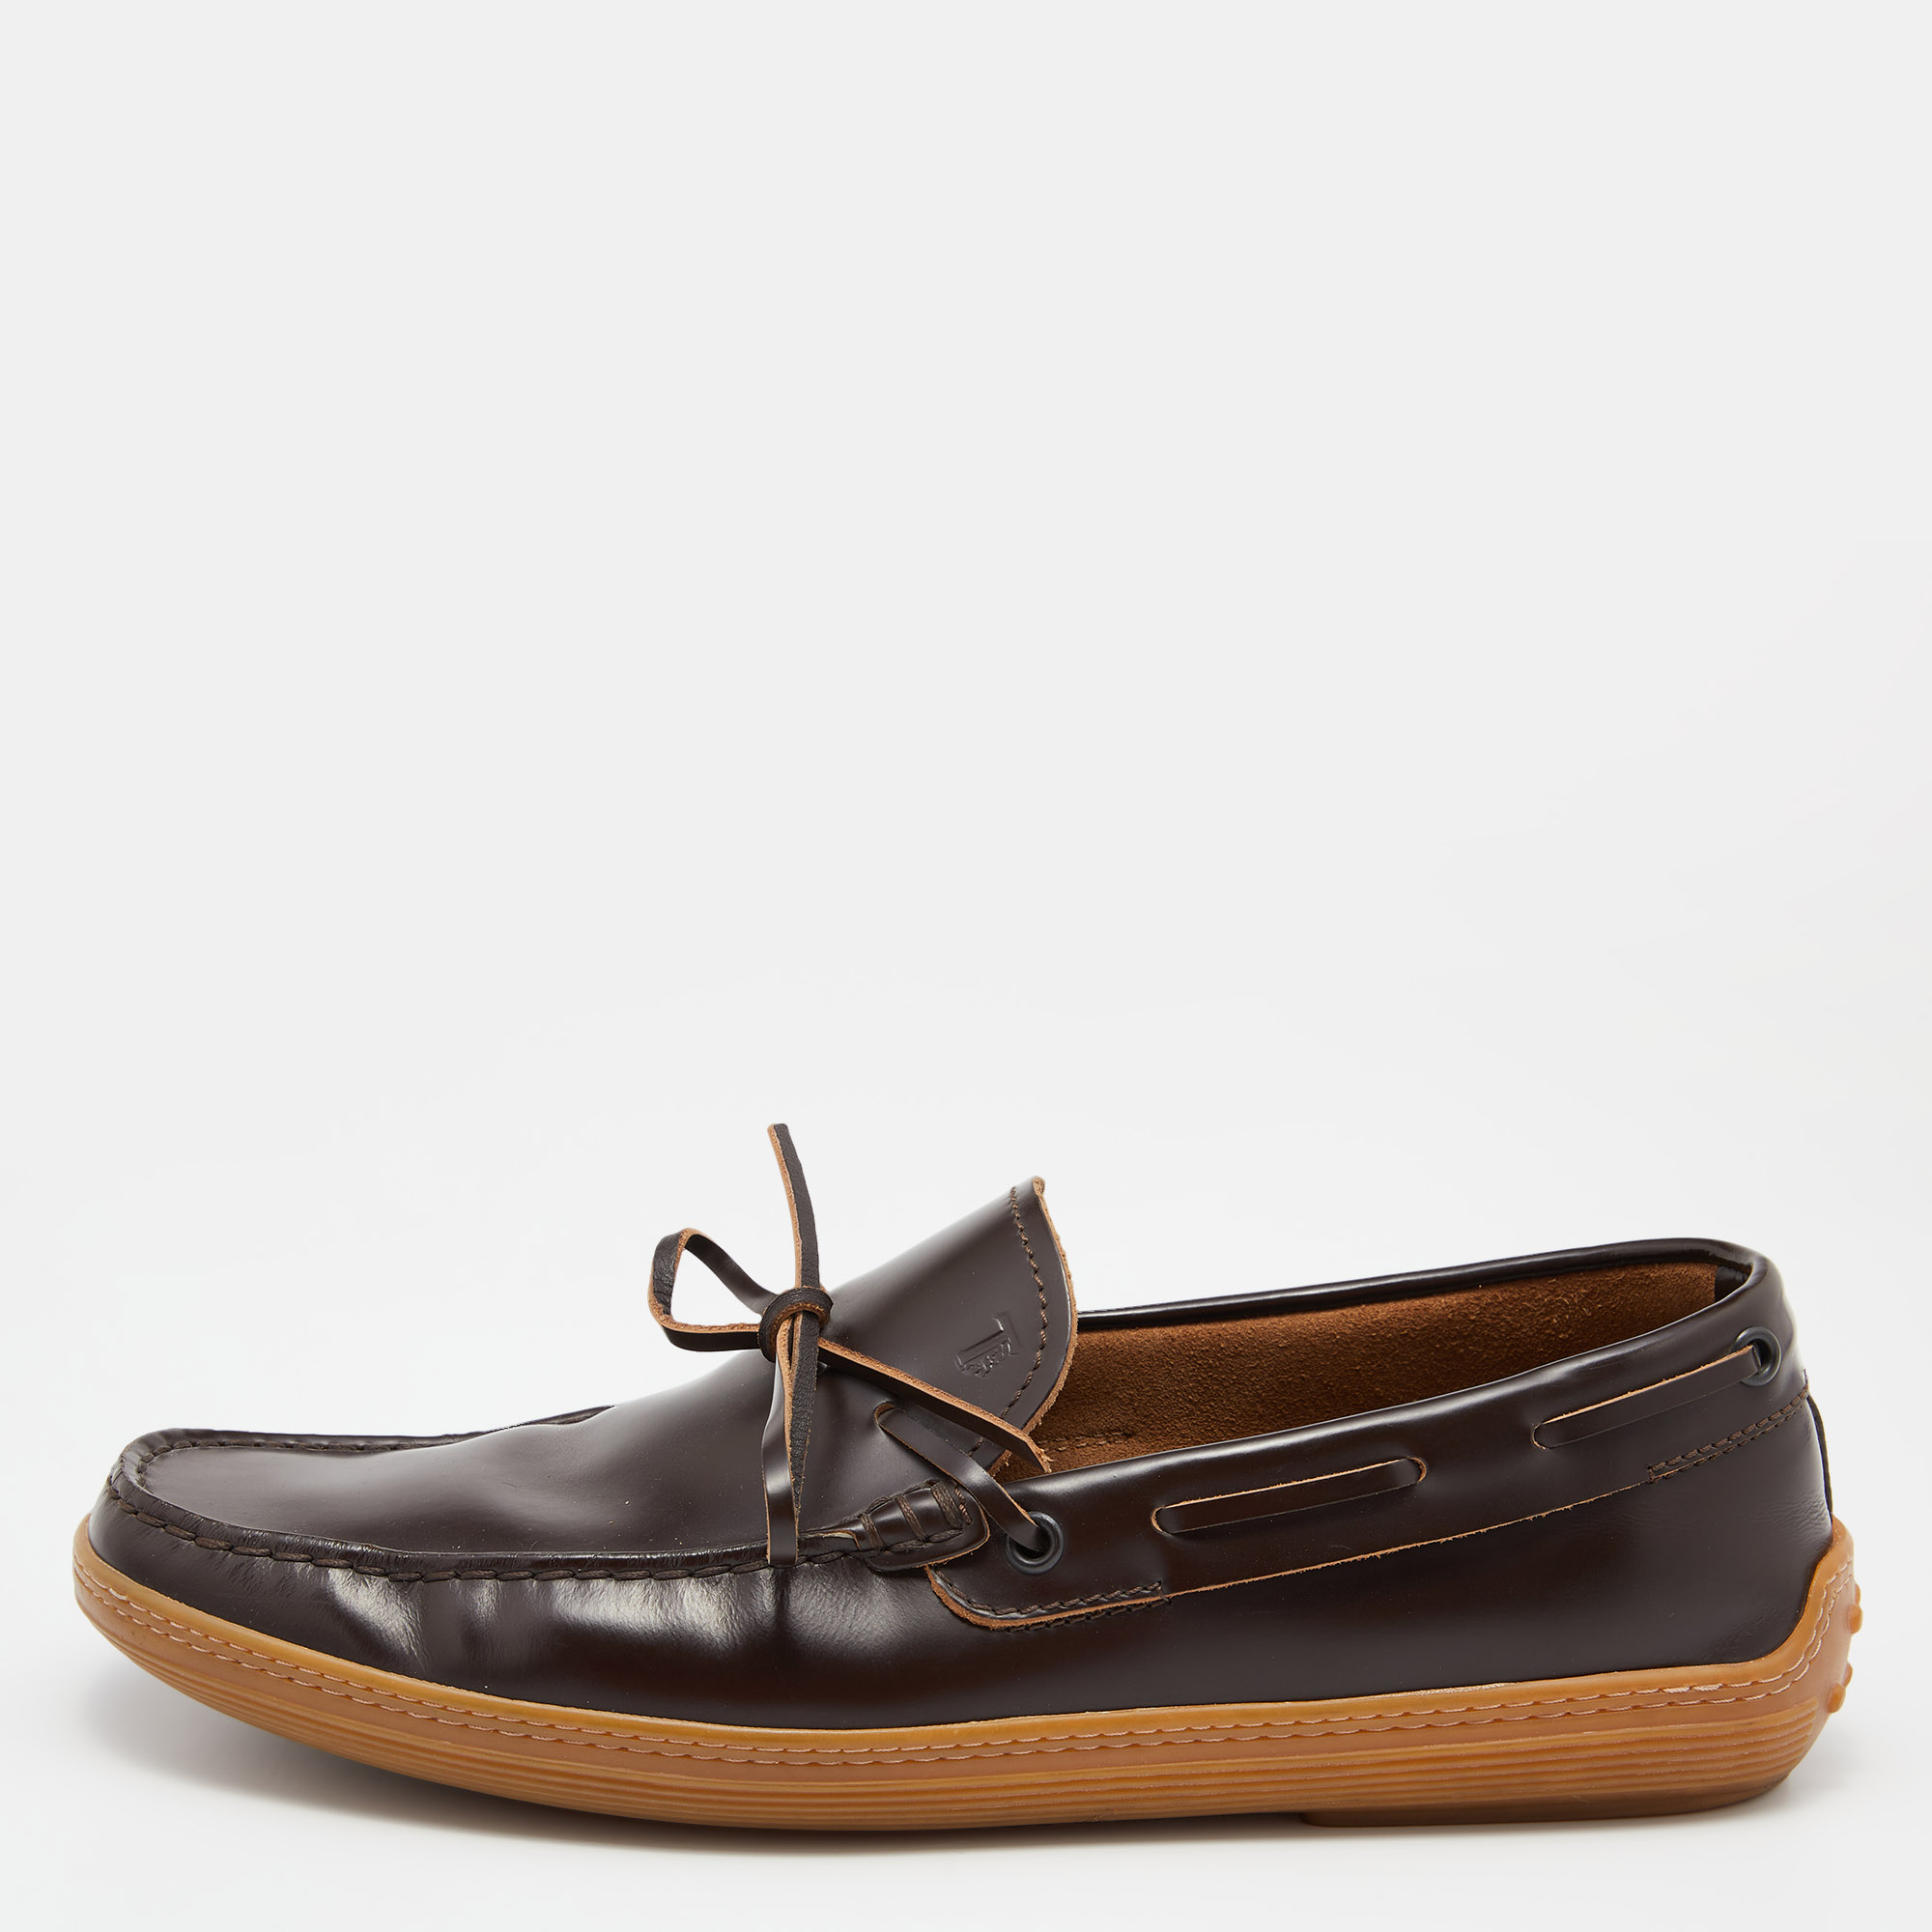 Tods  Brown Leather Bow Slip On Loafers Size 42.5